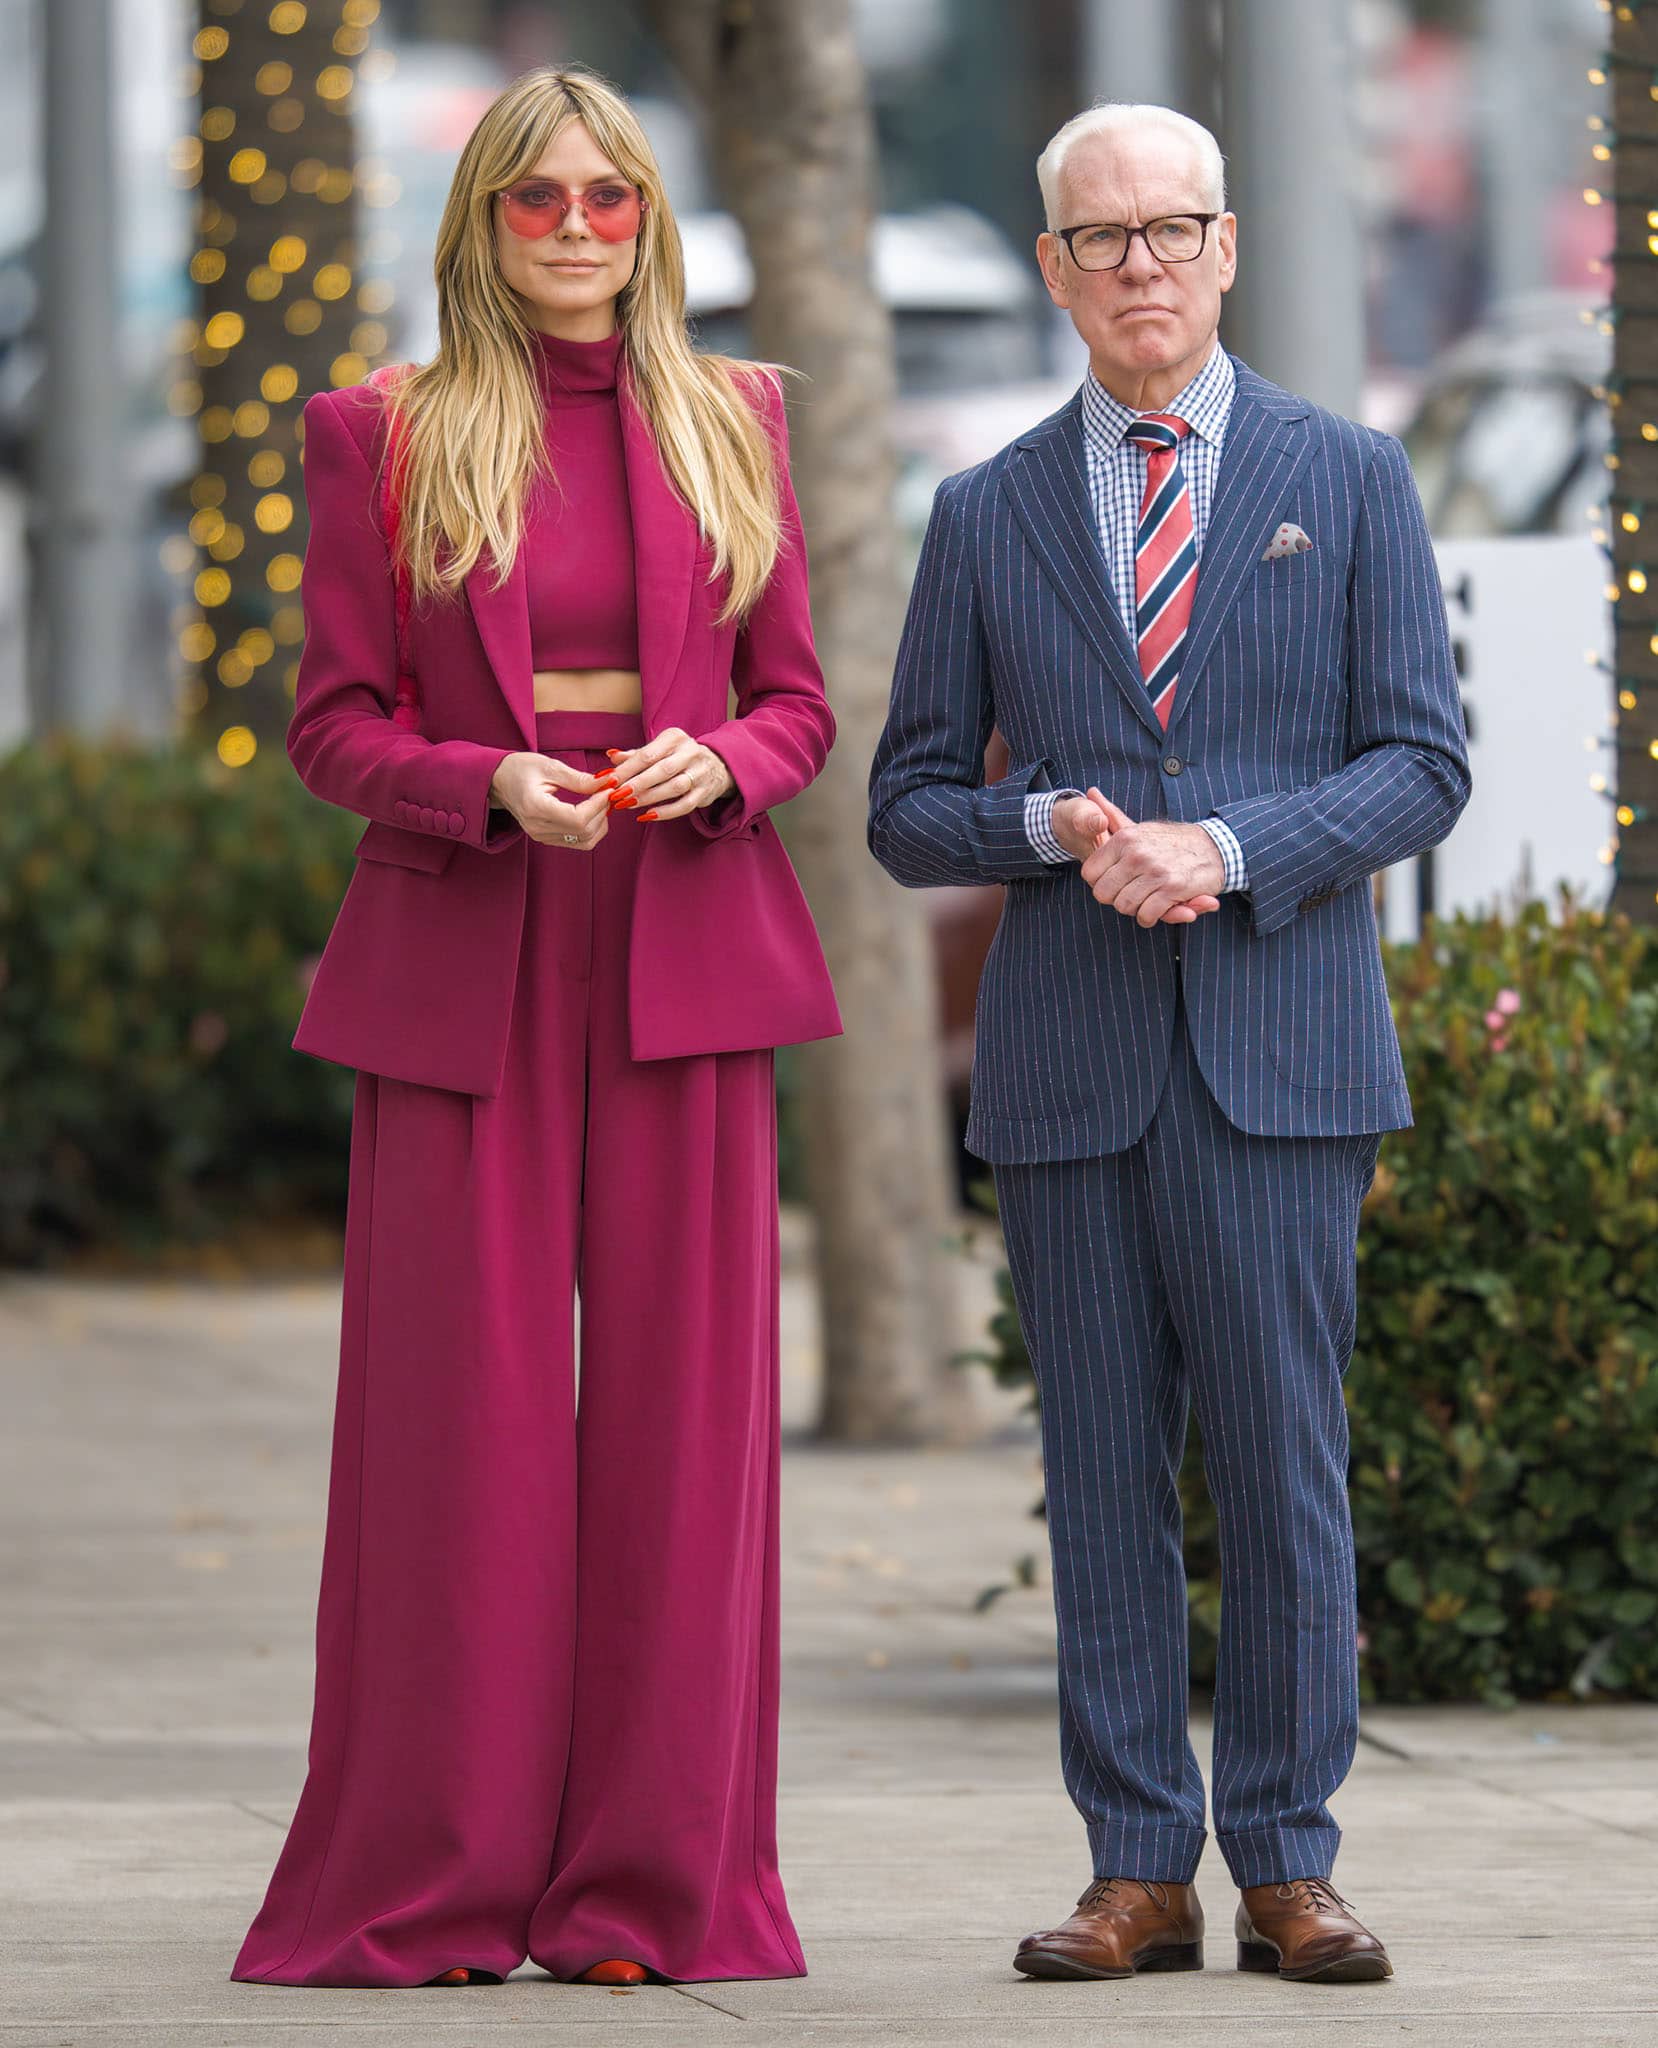 Heidi Klum and Tim Gunn are seen filming Making the Cut on Rodeo Drive in Los Angeles on January 17, 2022